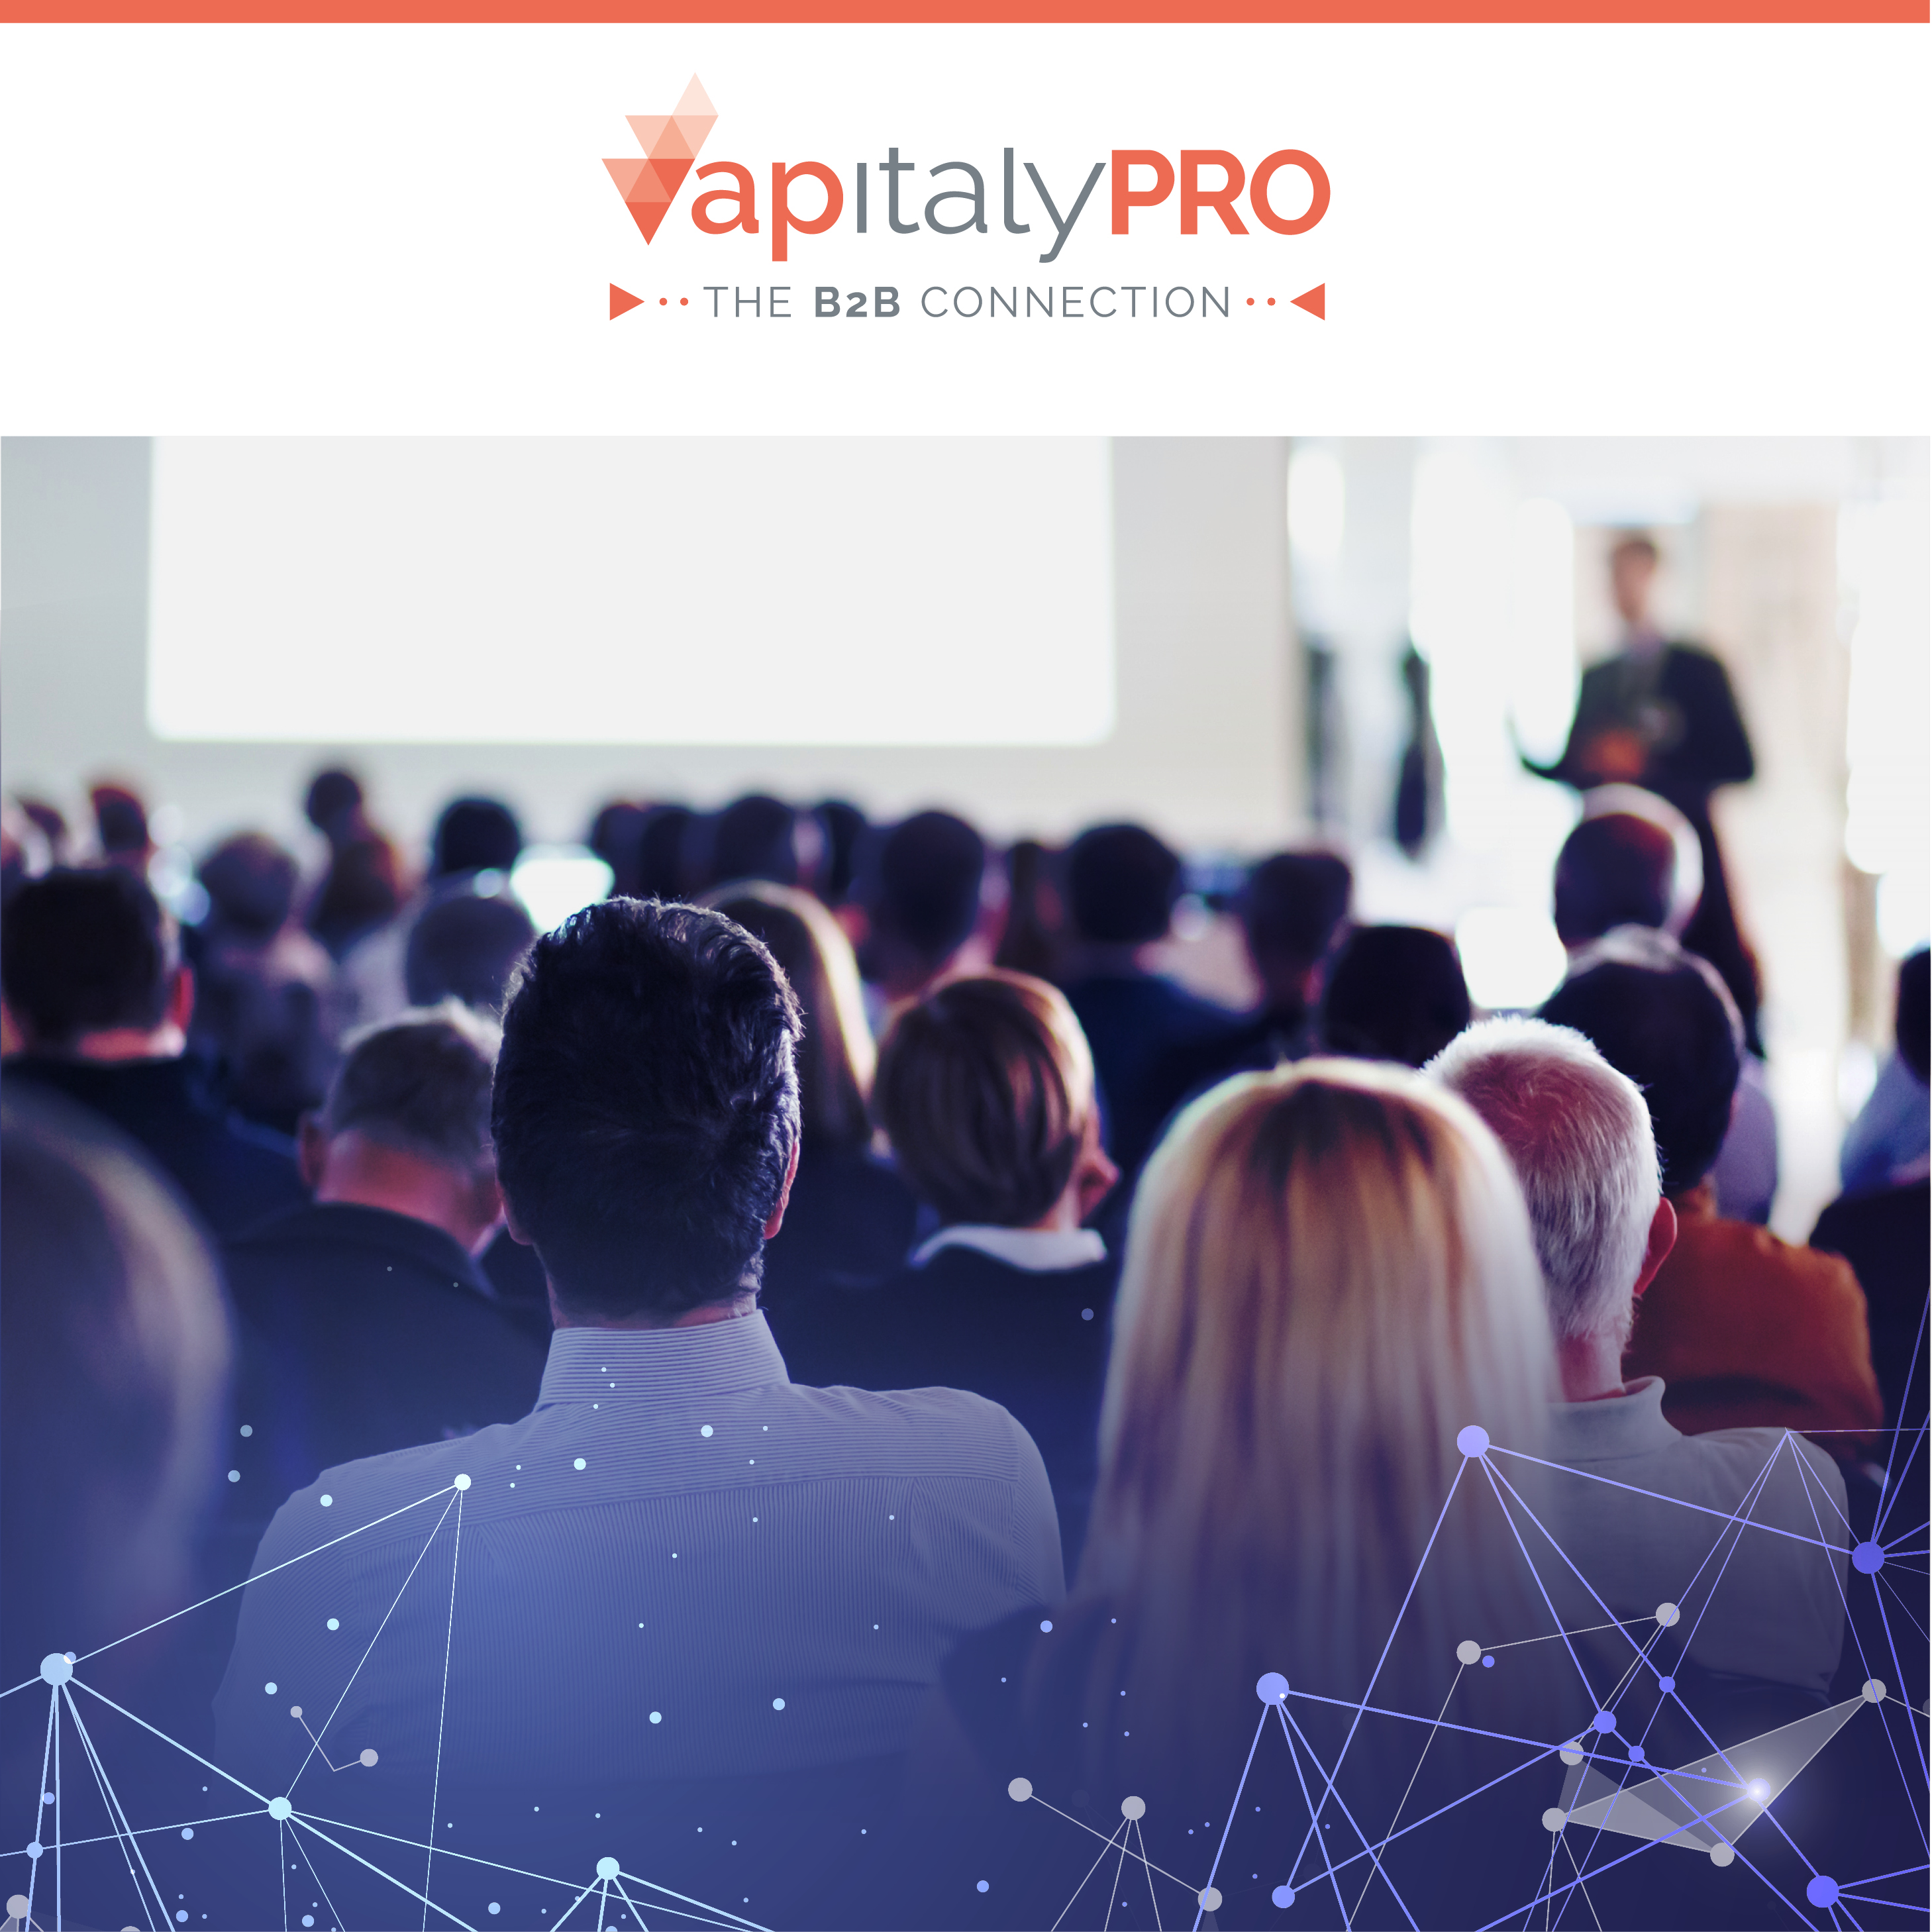 VapitalyPRO is also training find out more about all the Workshops